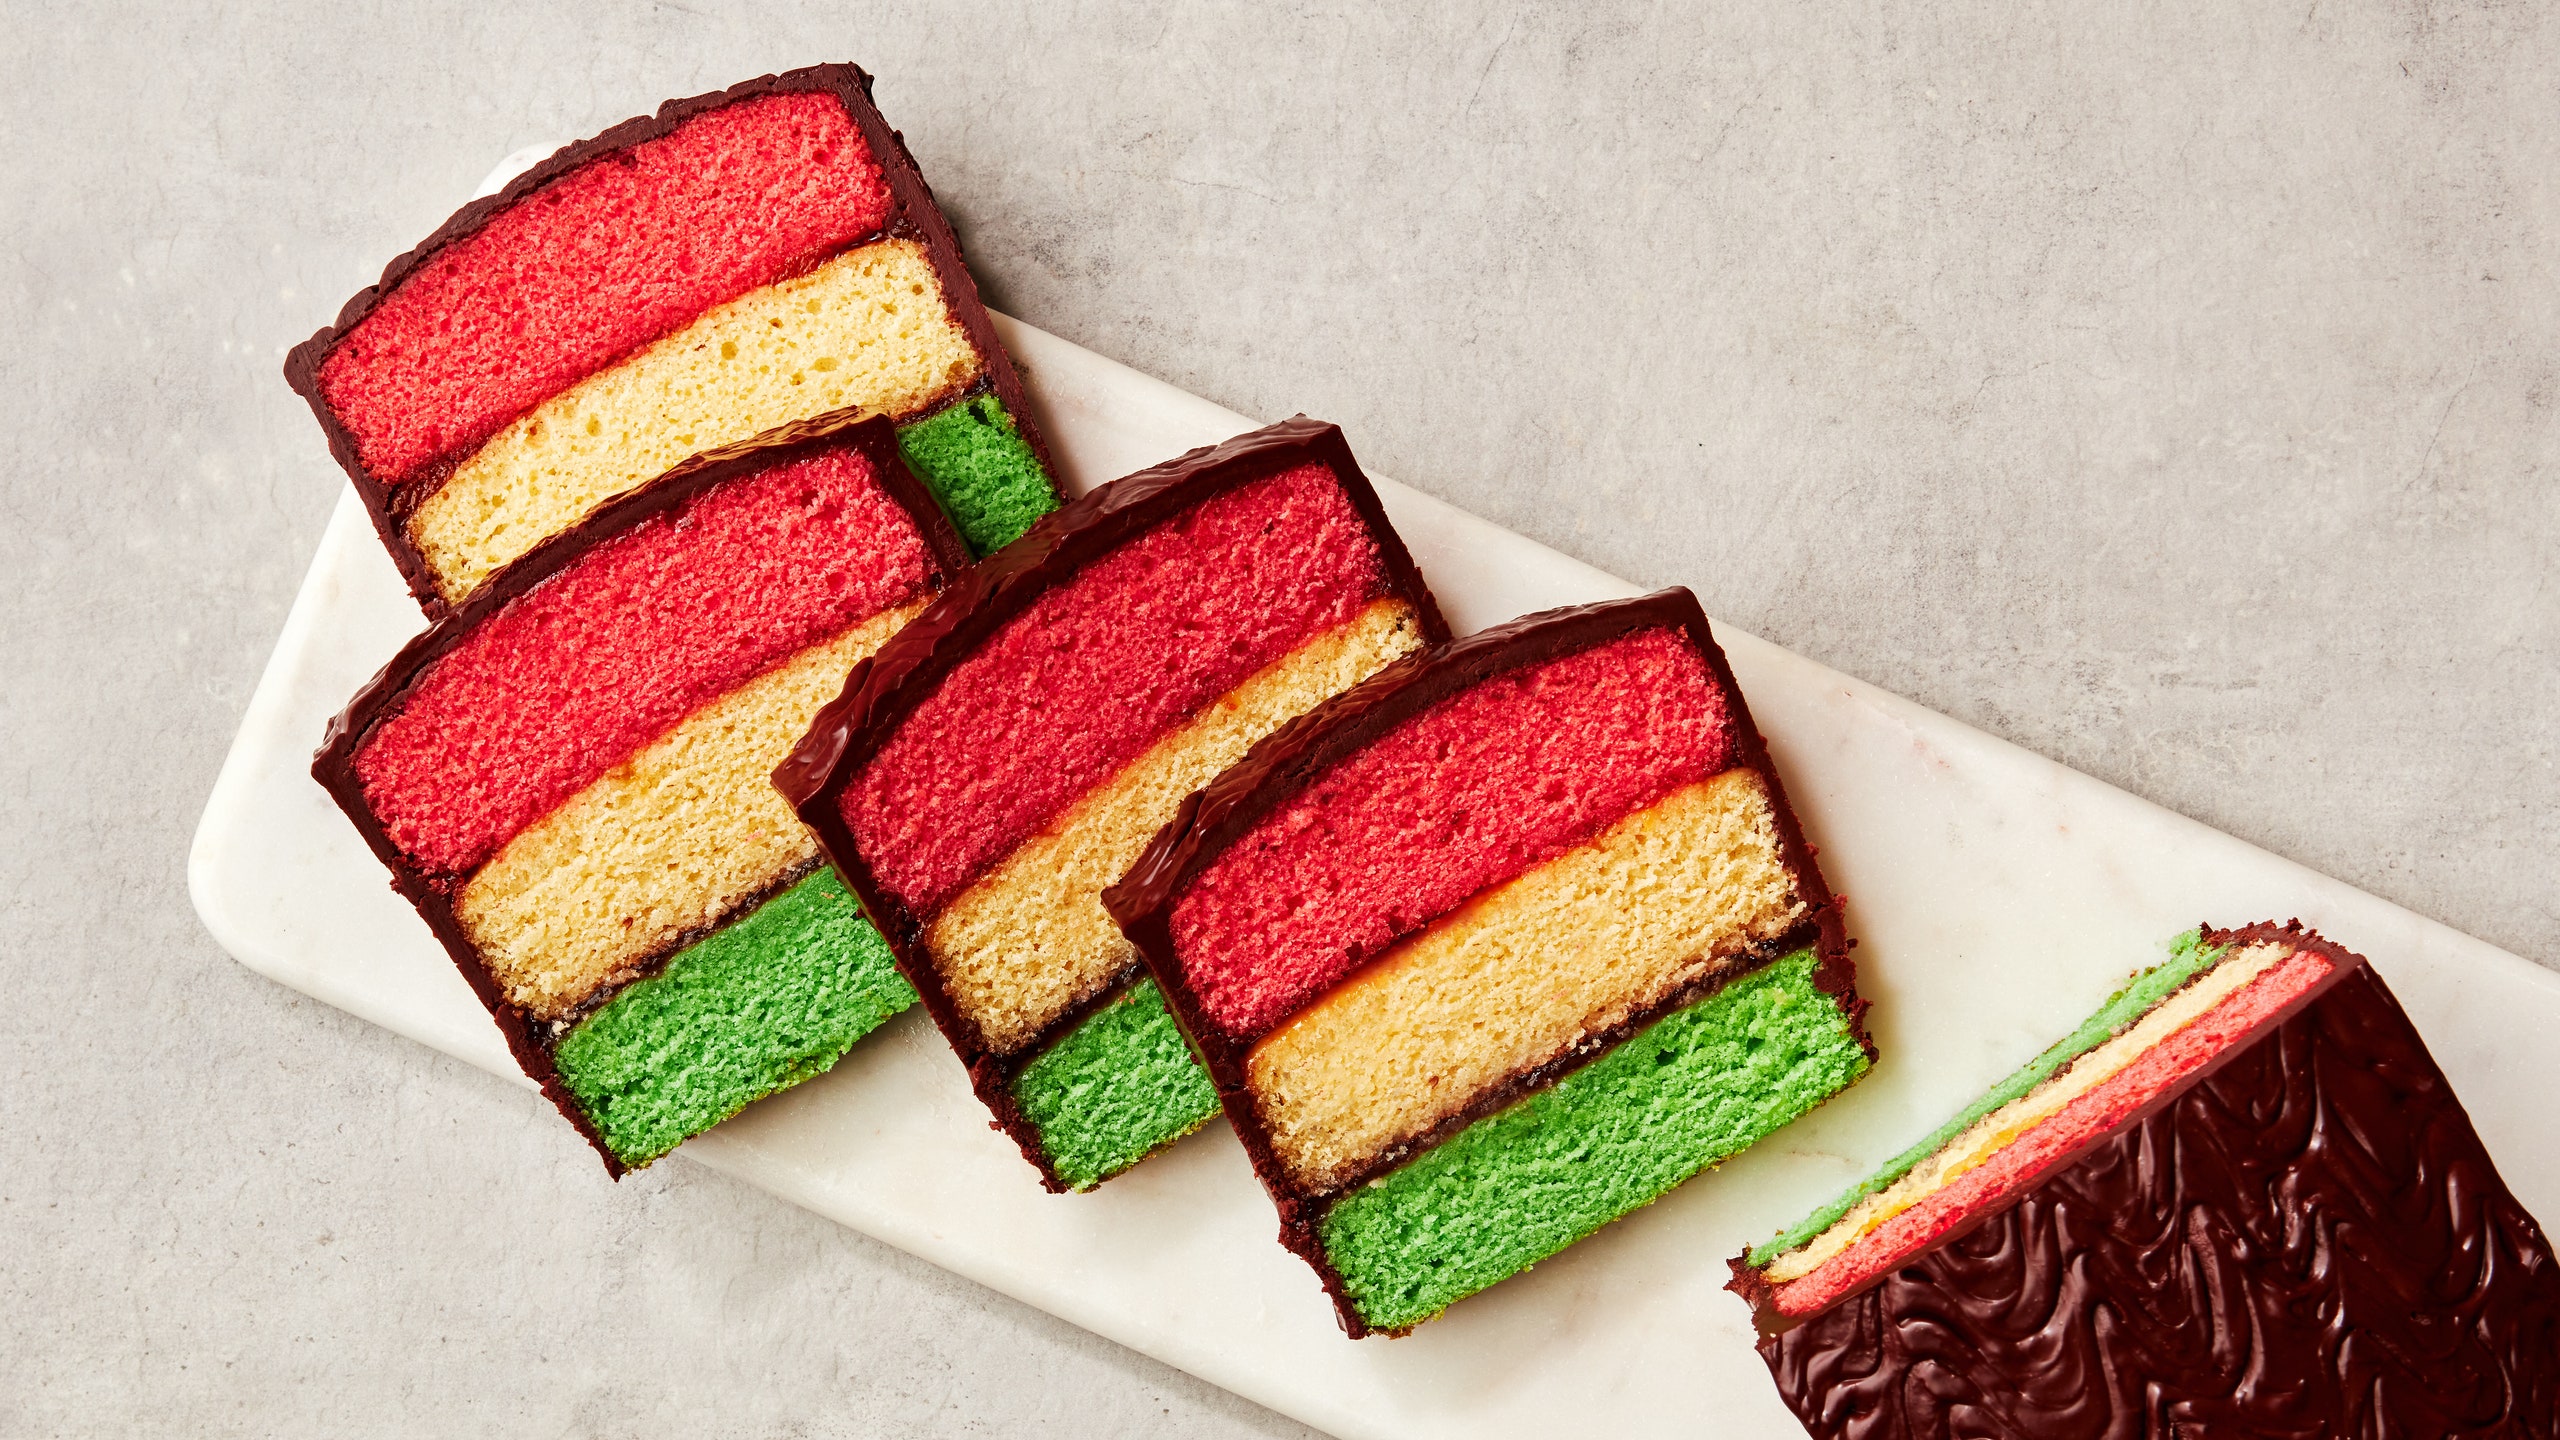 A rainbow cookie cake on a platter cut into slices.